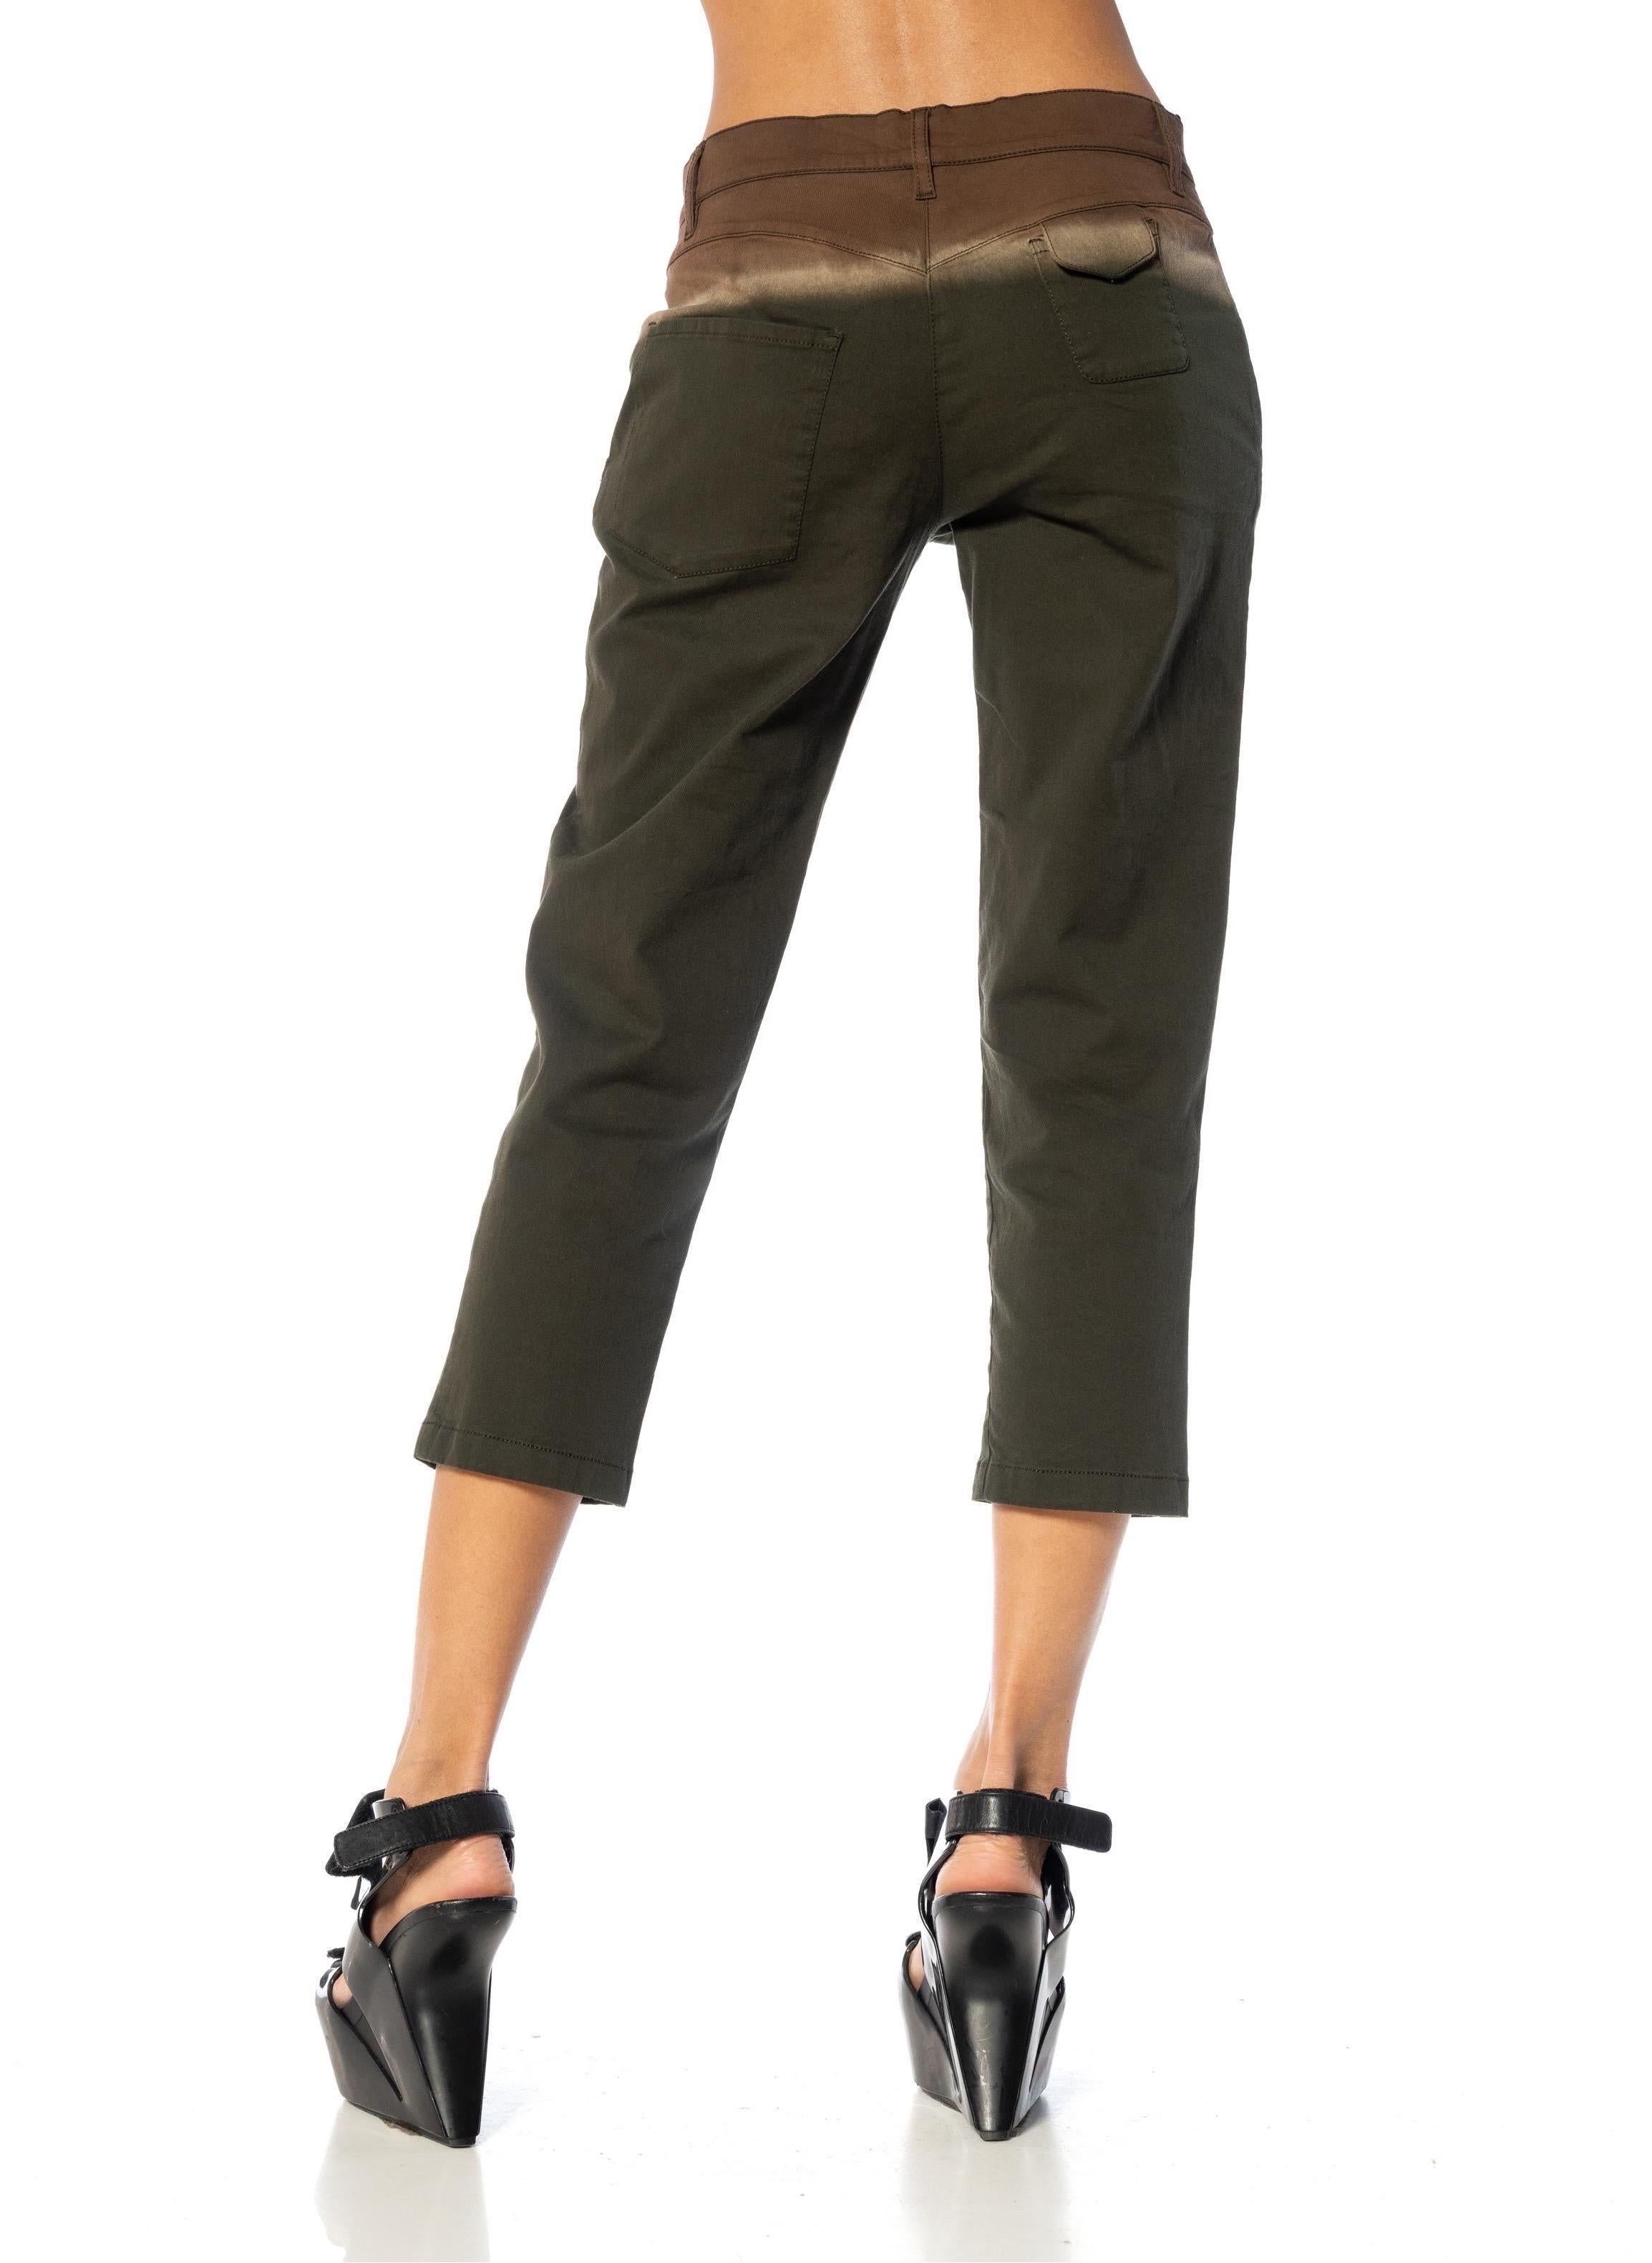 2000S PRADA Brown & Olive Green Cotton Pants For Sale 2